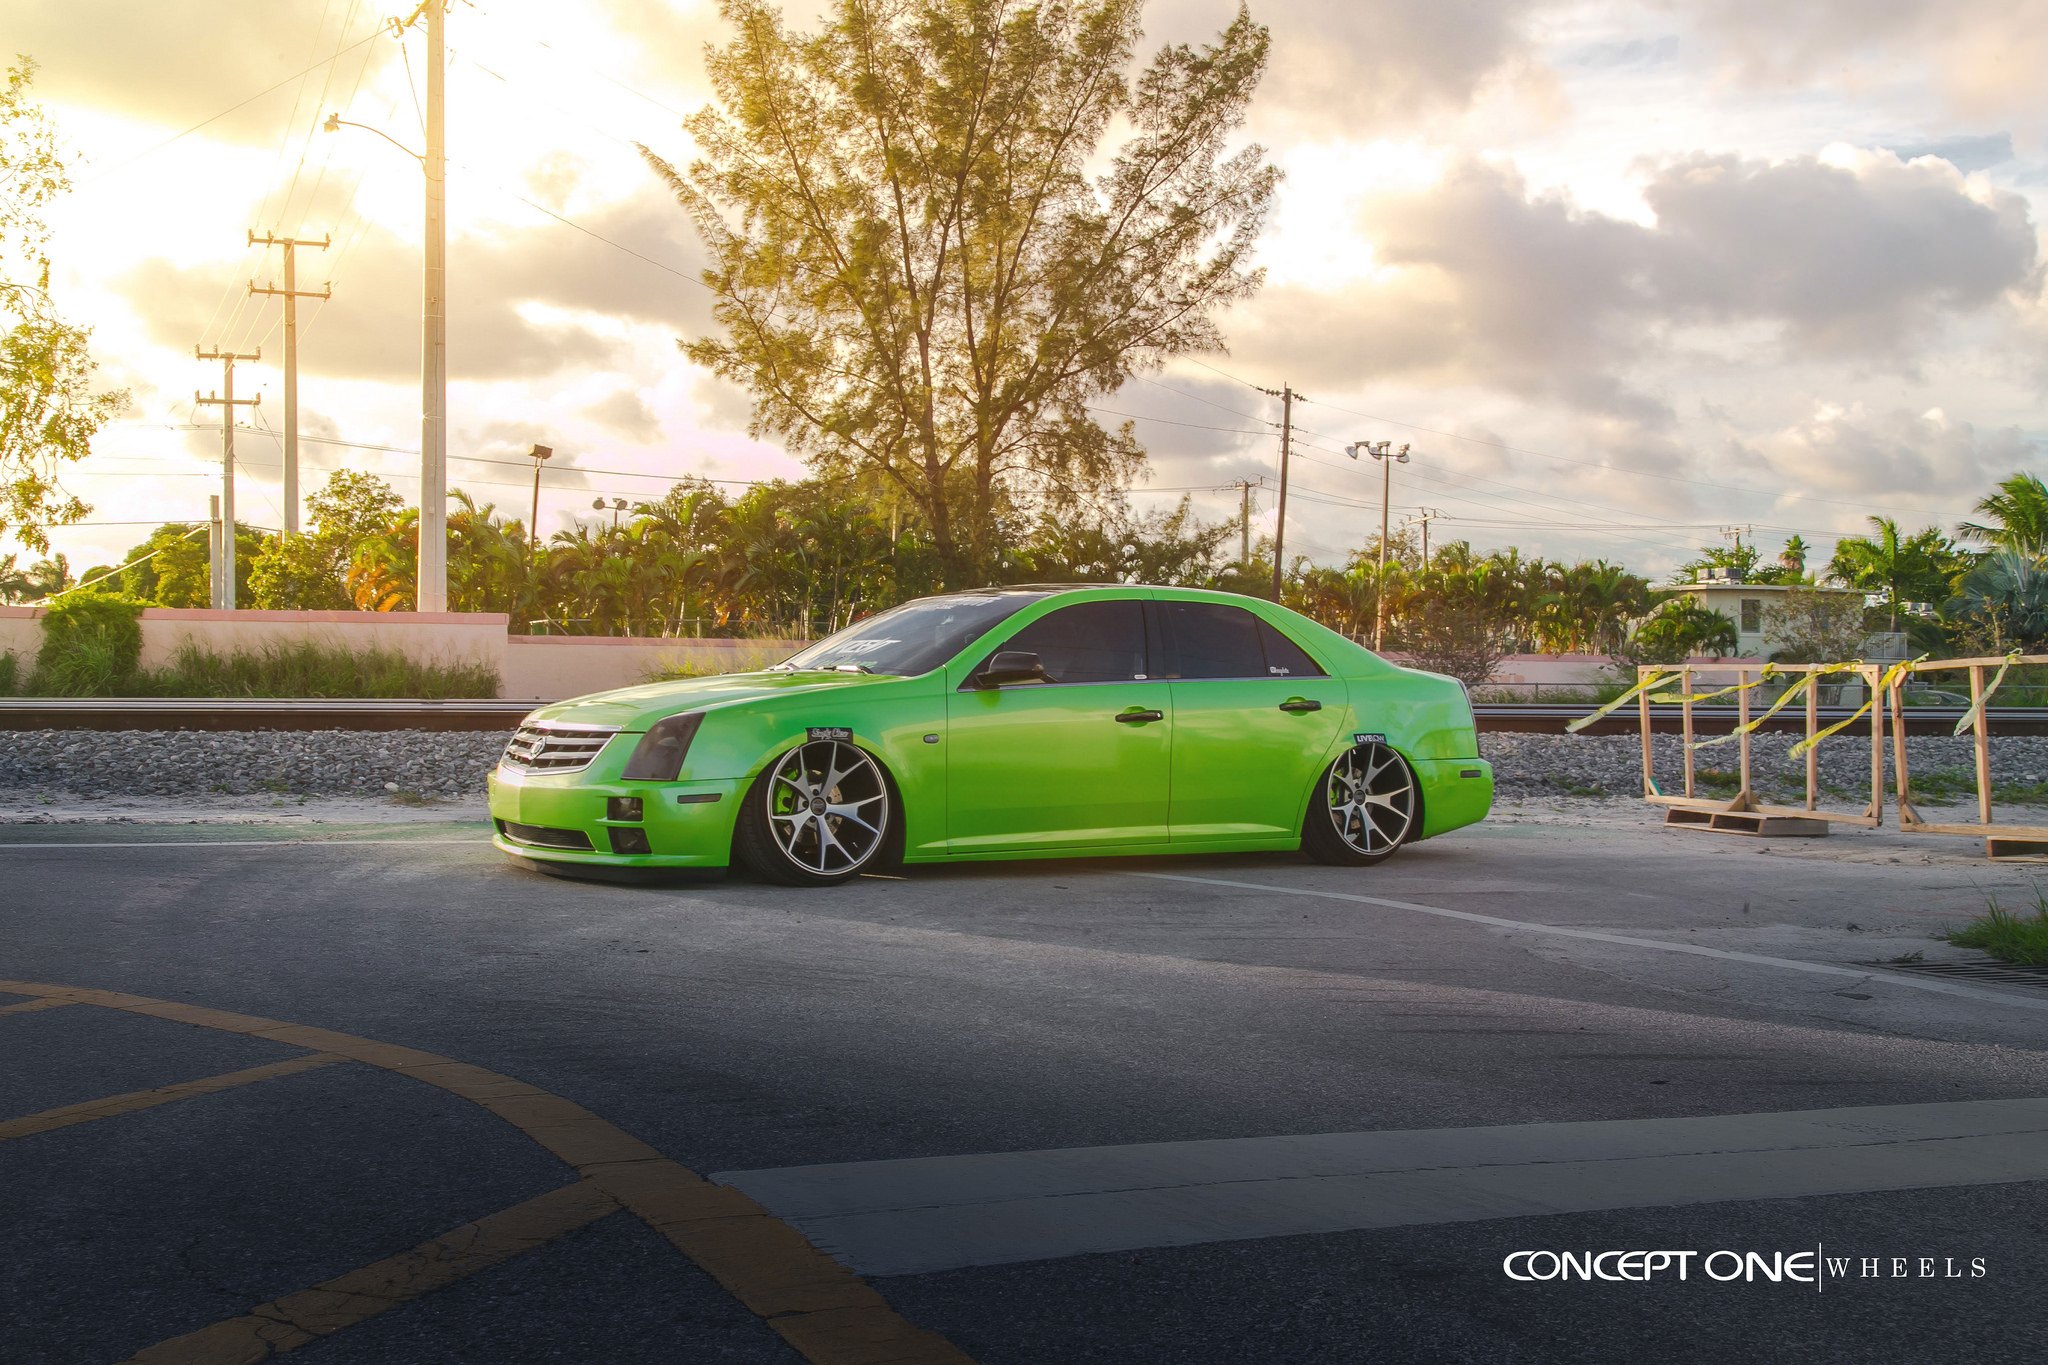 Custom Front Bumper on Green Lowered Cadillac STS - Photo by Concept One